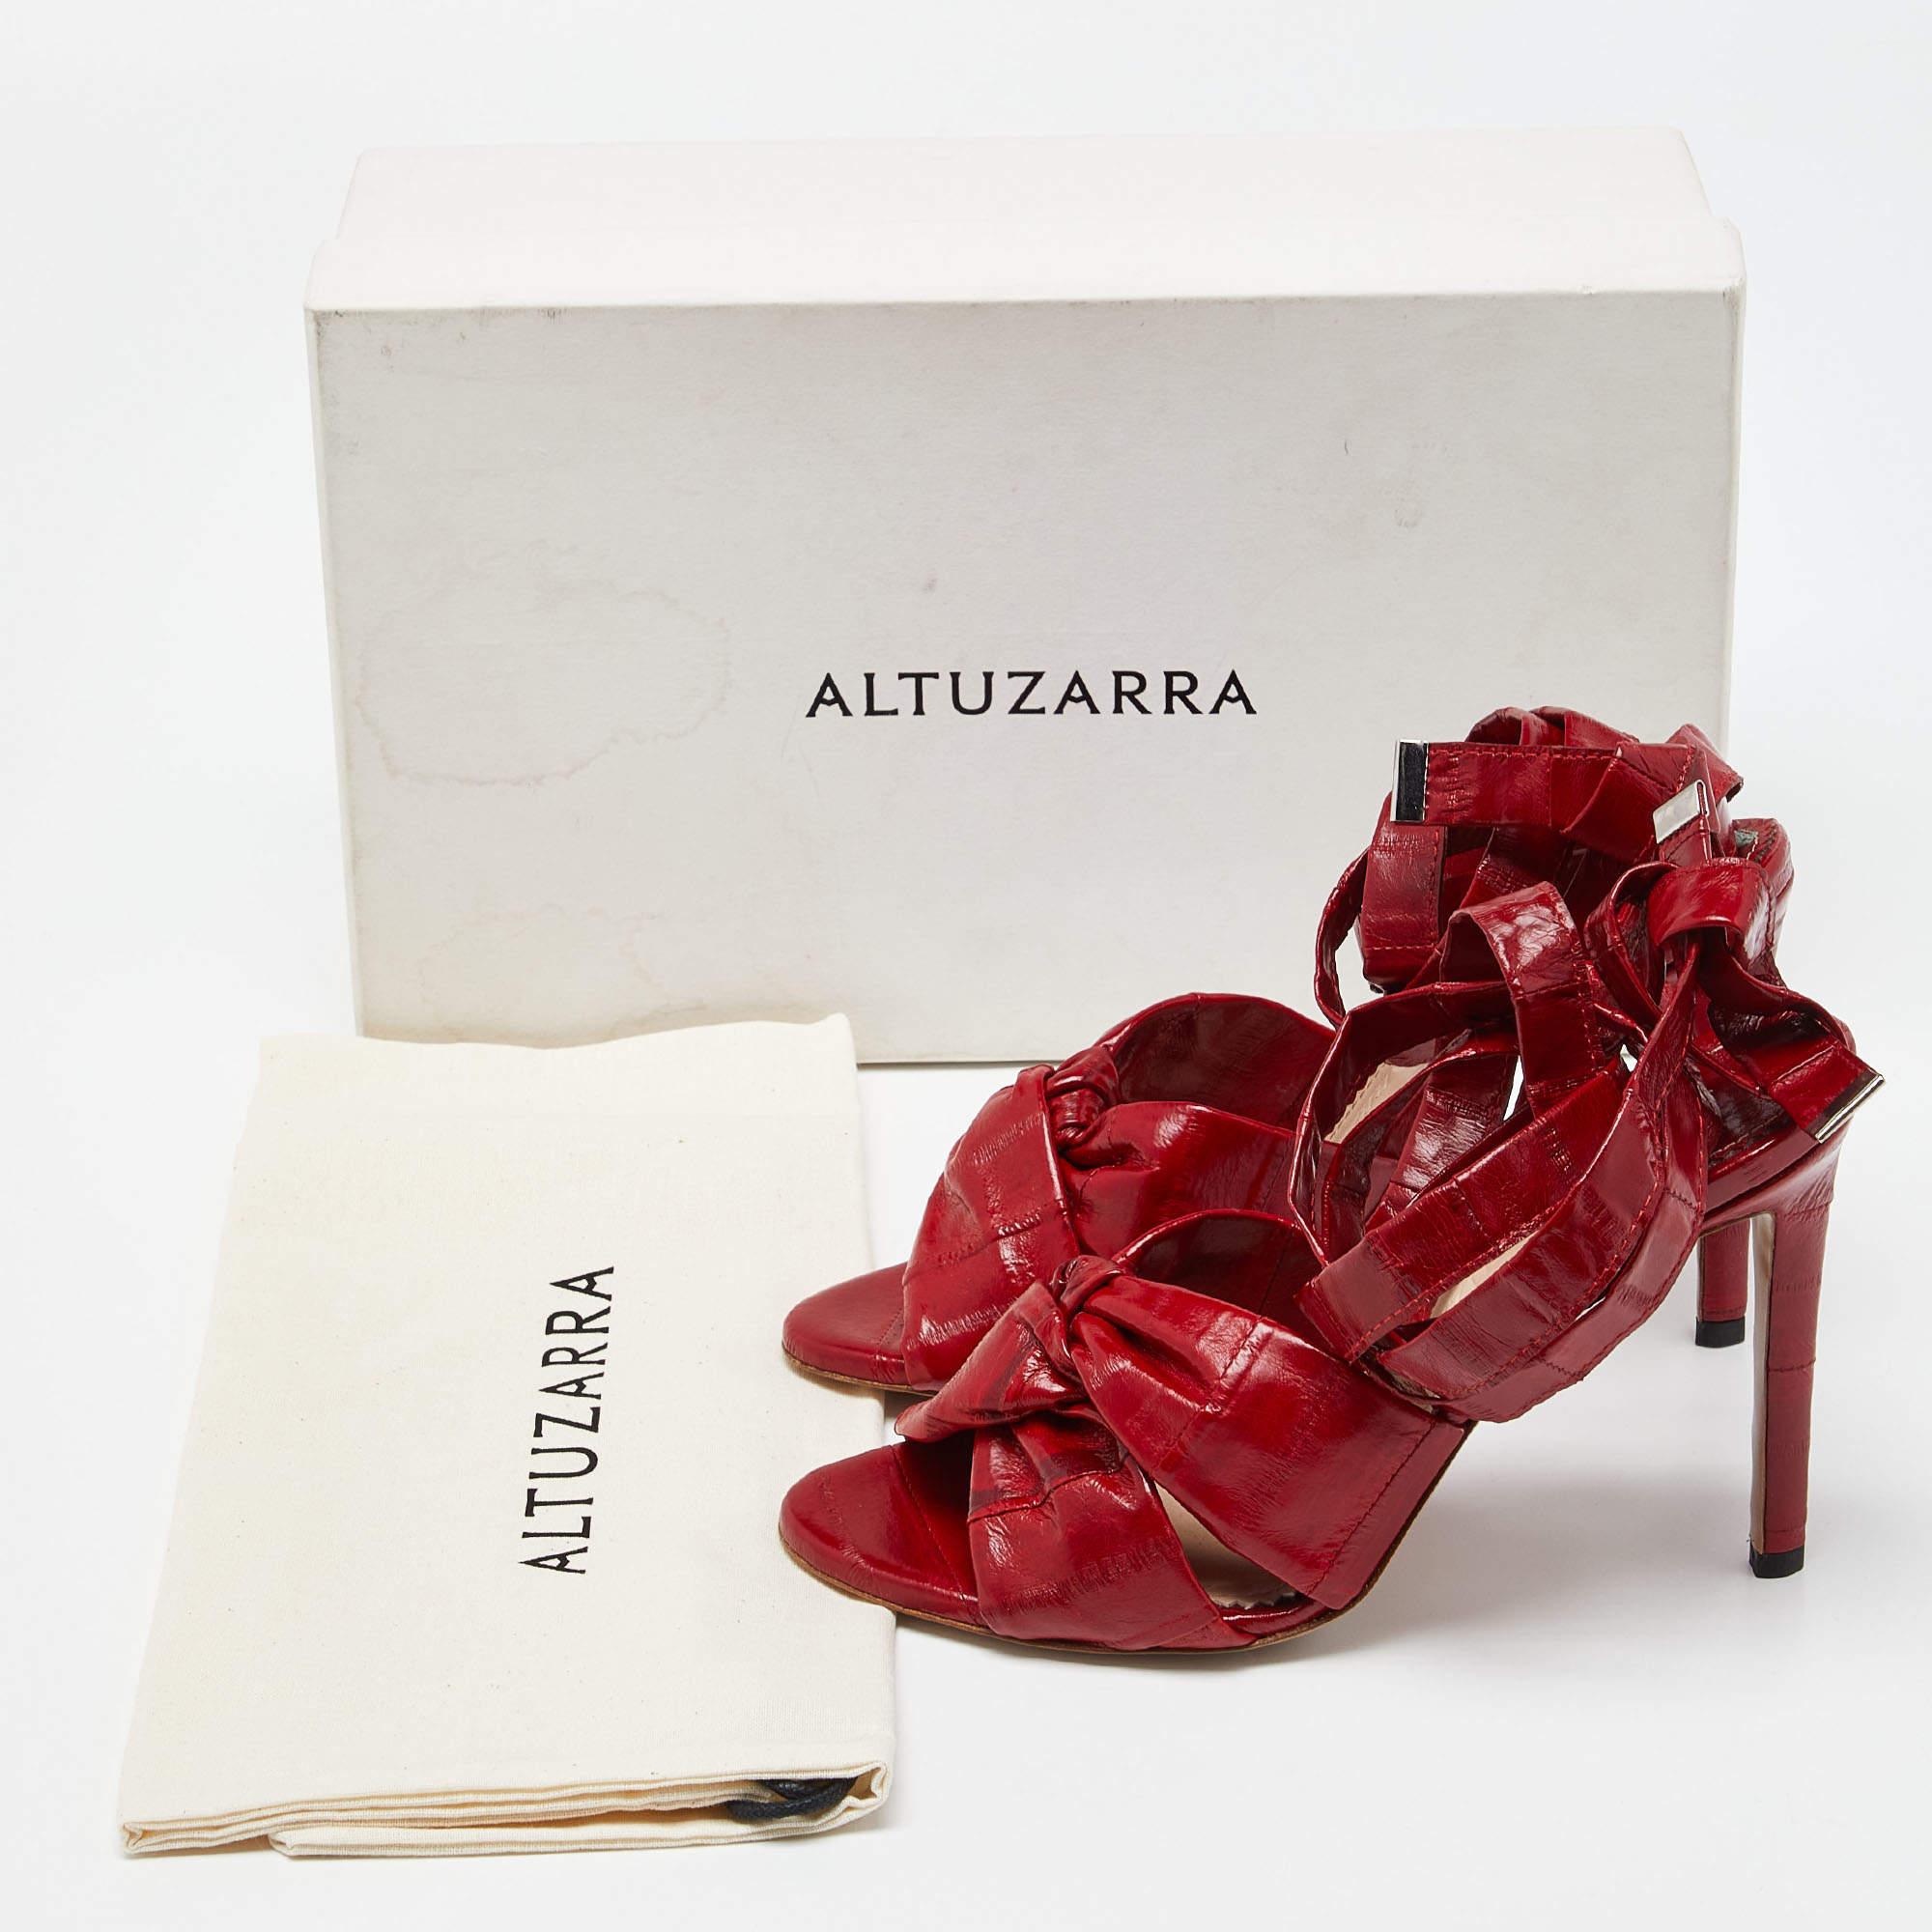 Altuzarra Red Eel Leather 'Zuni' Knotted Sandals Size 35 For Sale 5